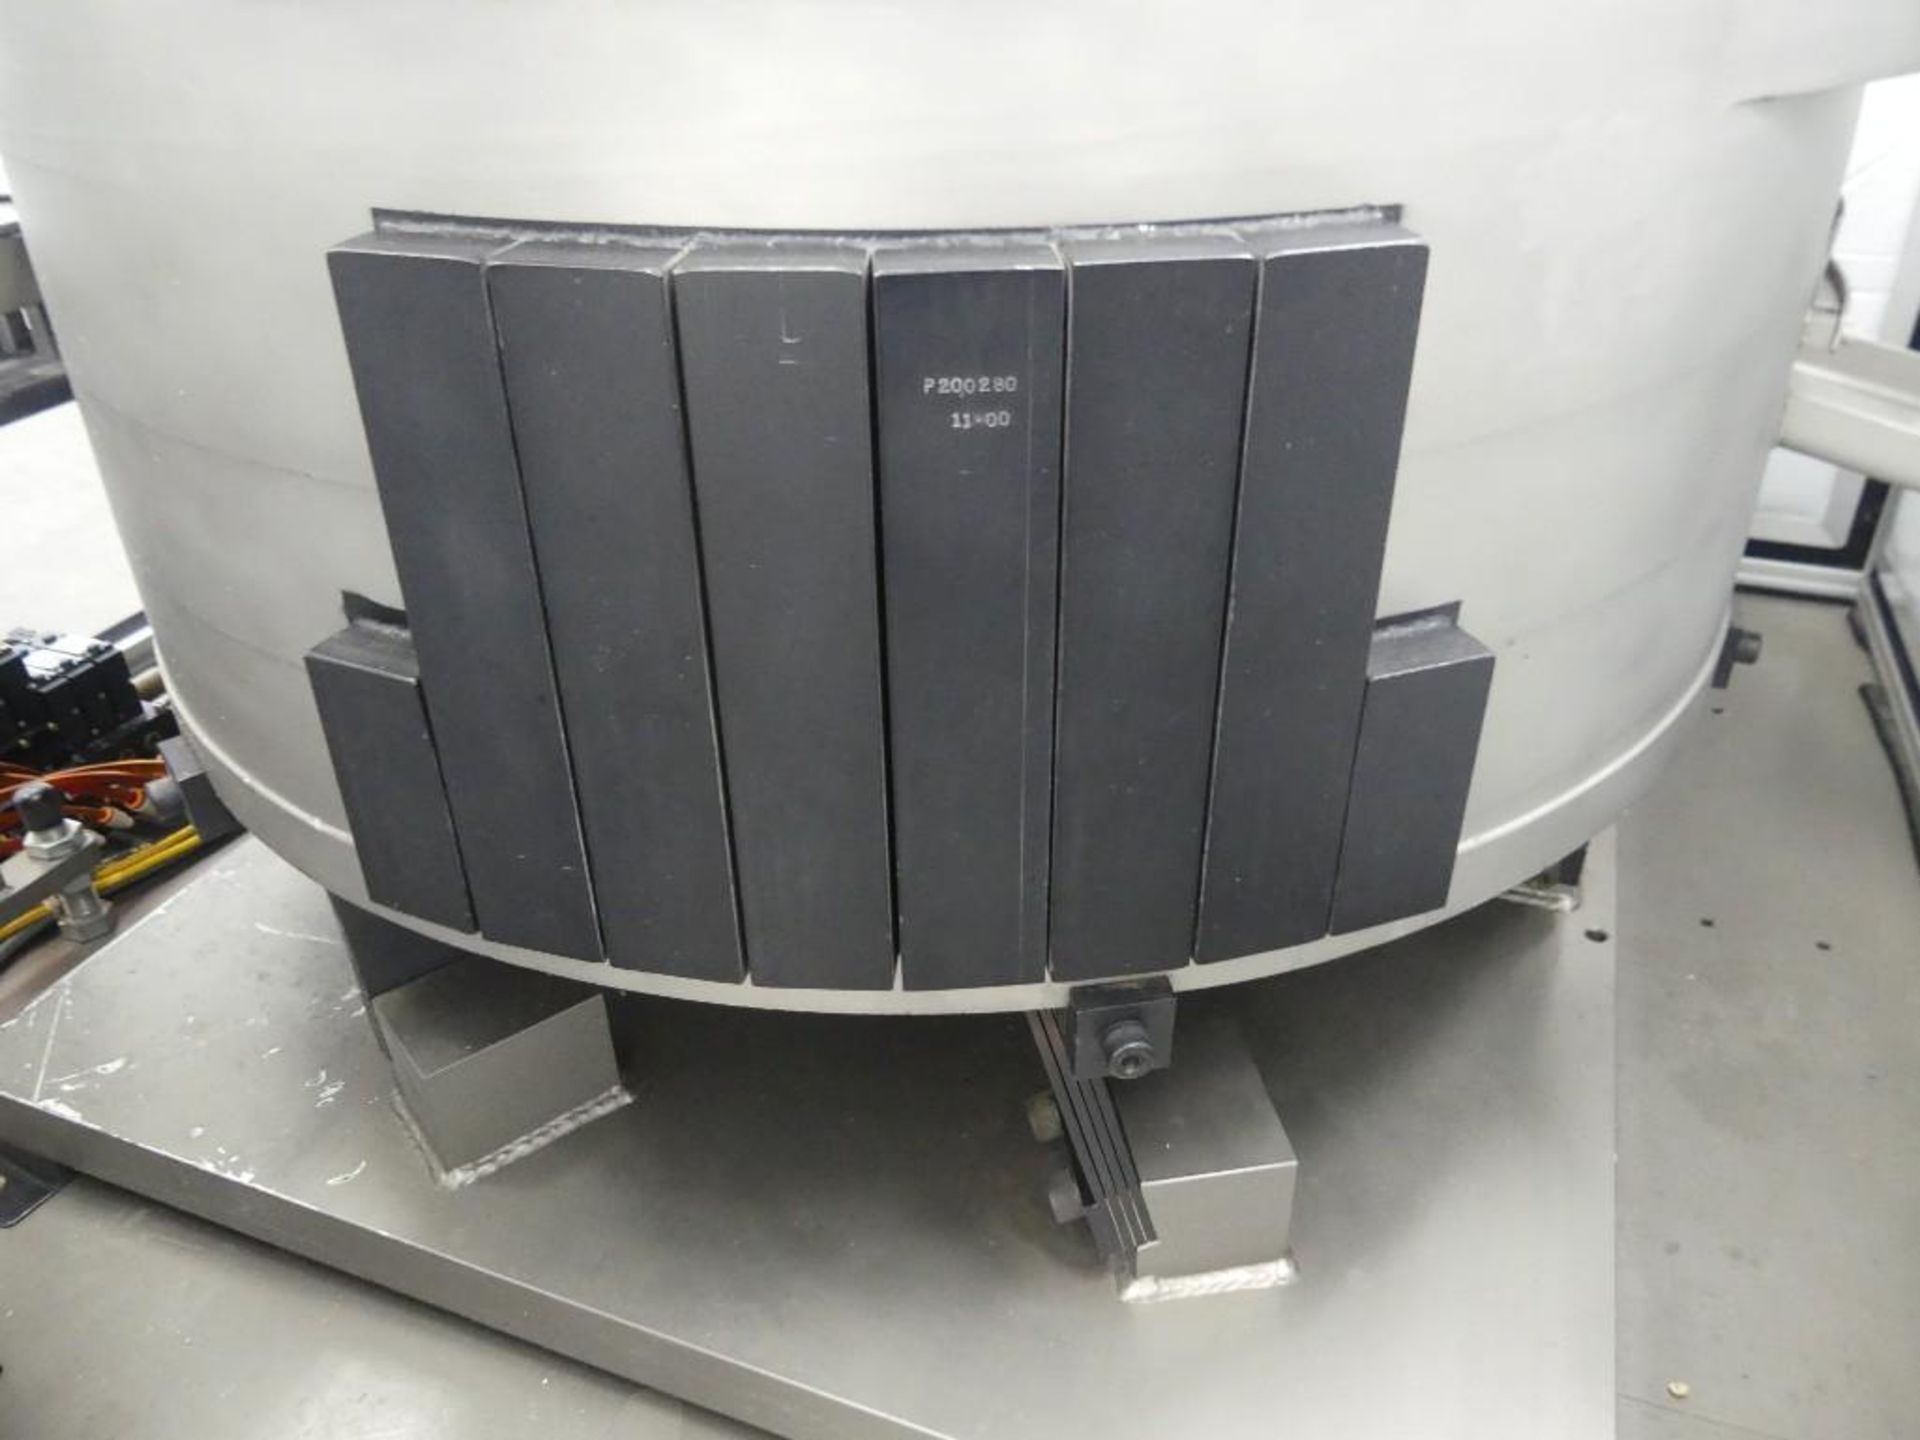 Performance Feeders, Inc. Stainless Steel Vibratory Cap Feeder And Sorter - Image 9 of 25